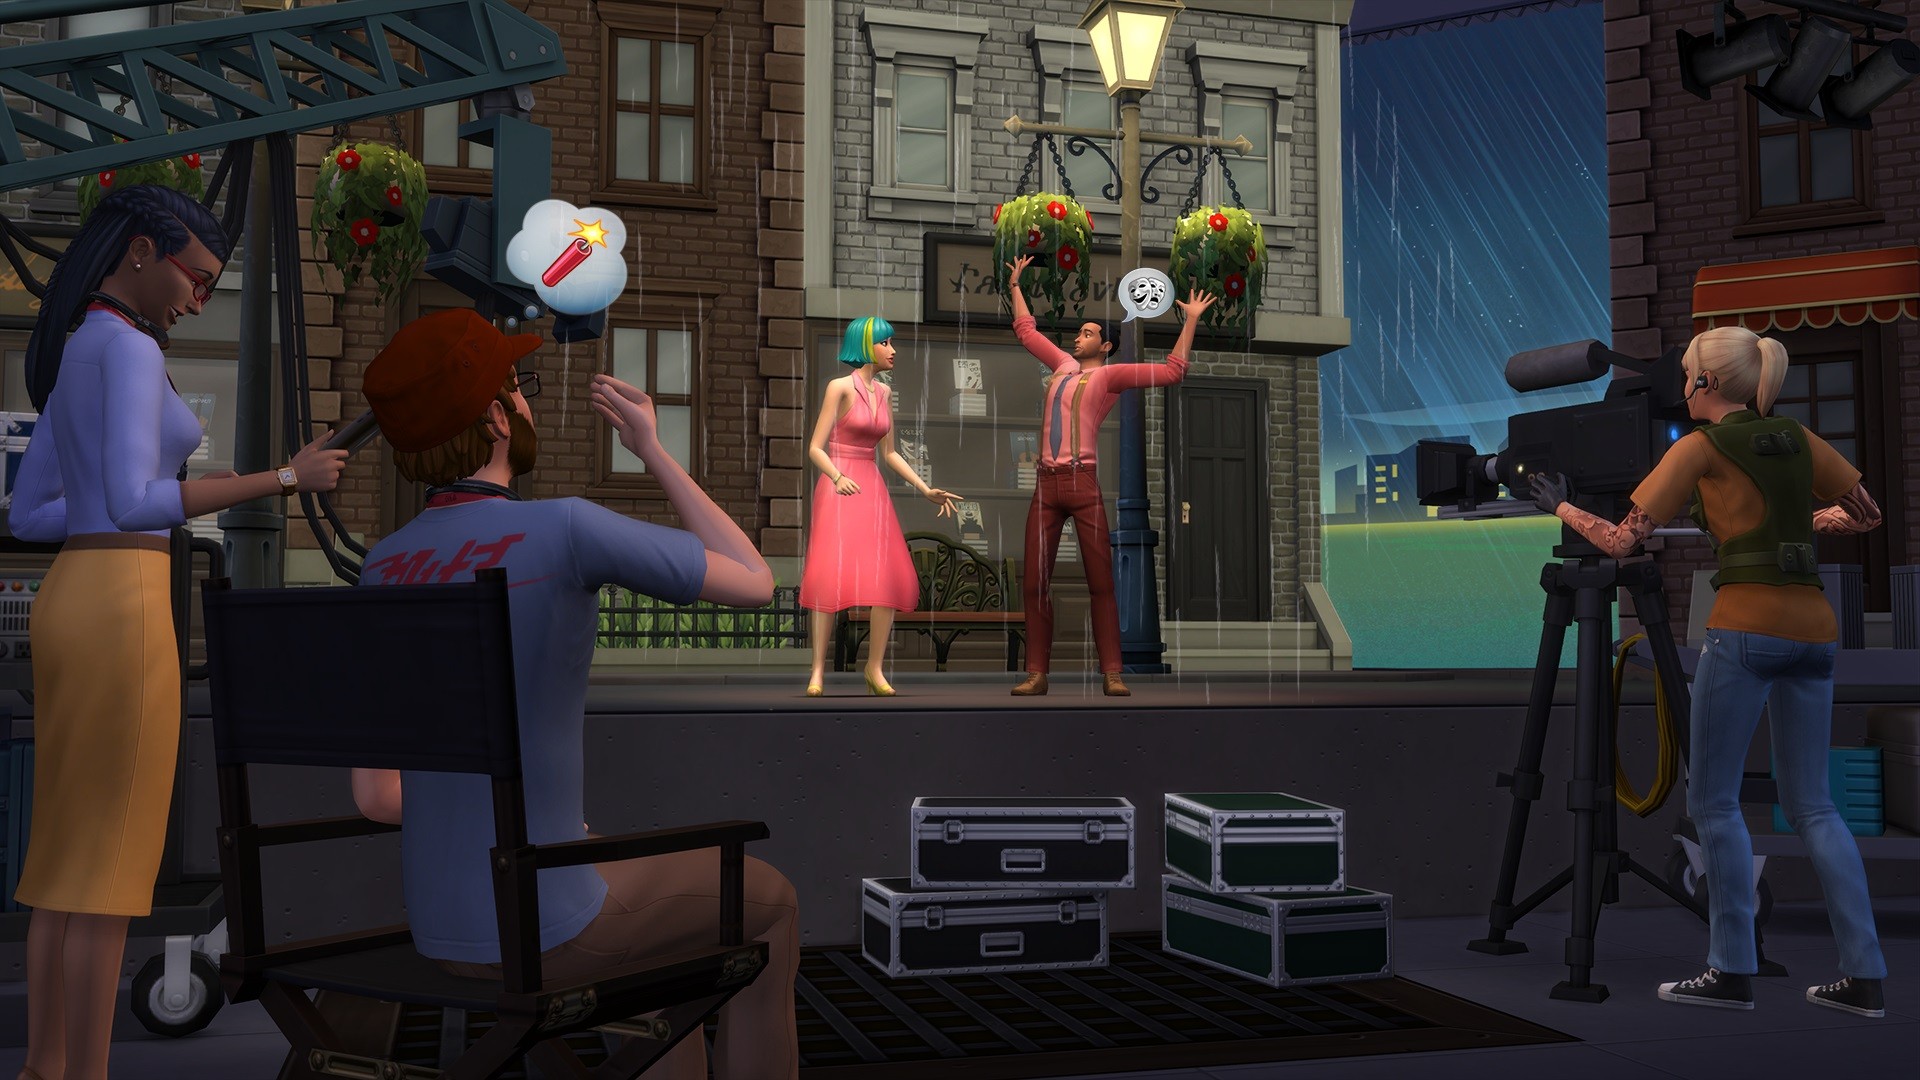 The Sims 4: Get Famous - screenshot 3